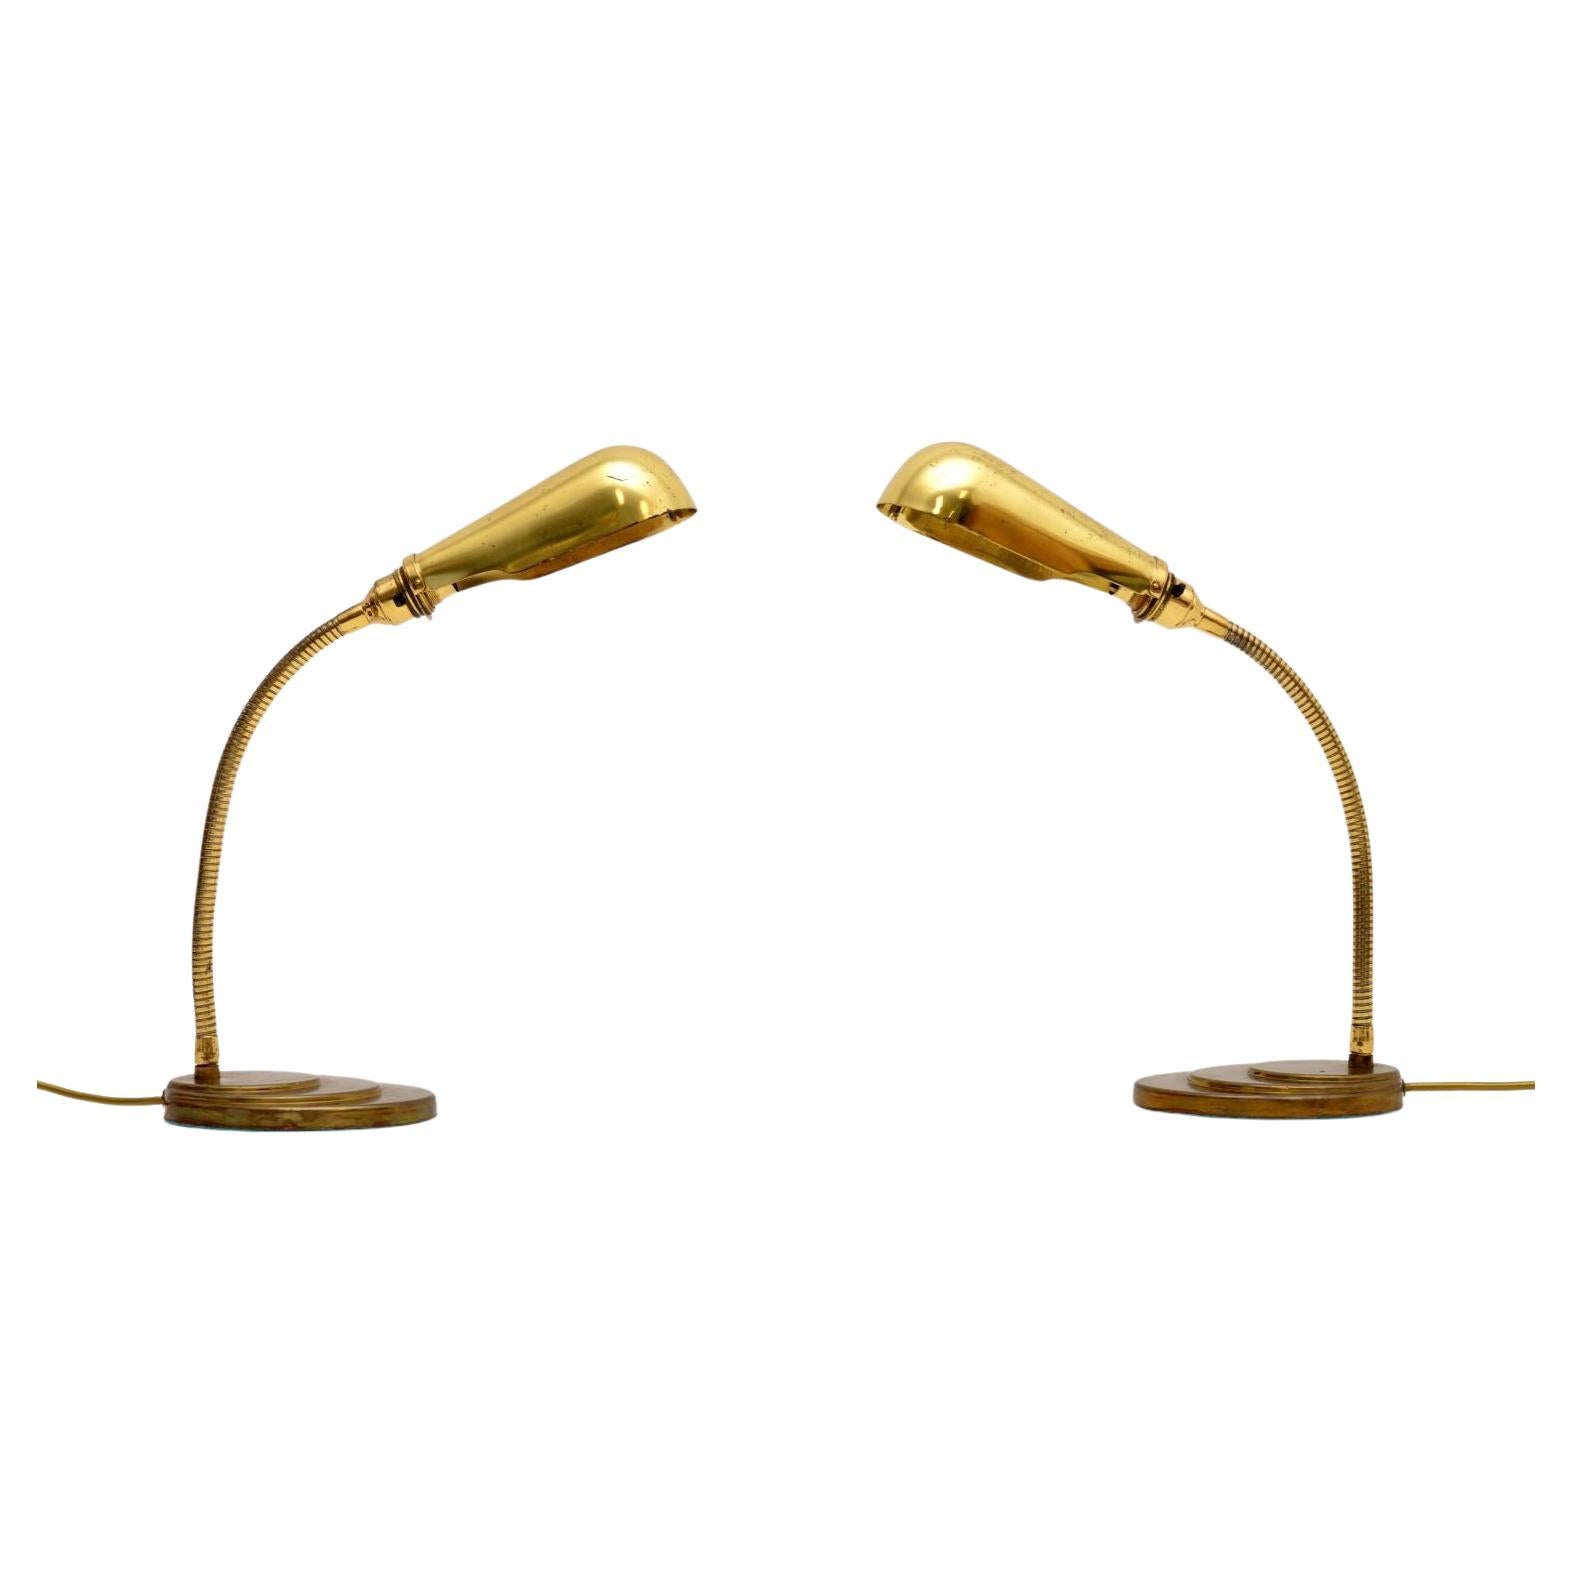 1960’s Pair of Vintage Brass Desk / Table Lamps